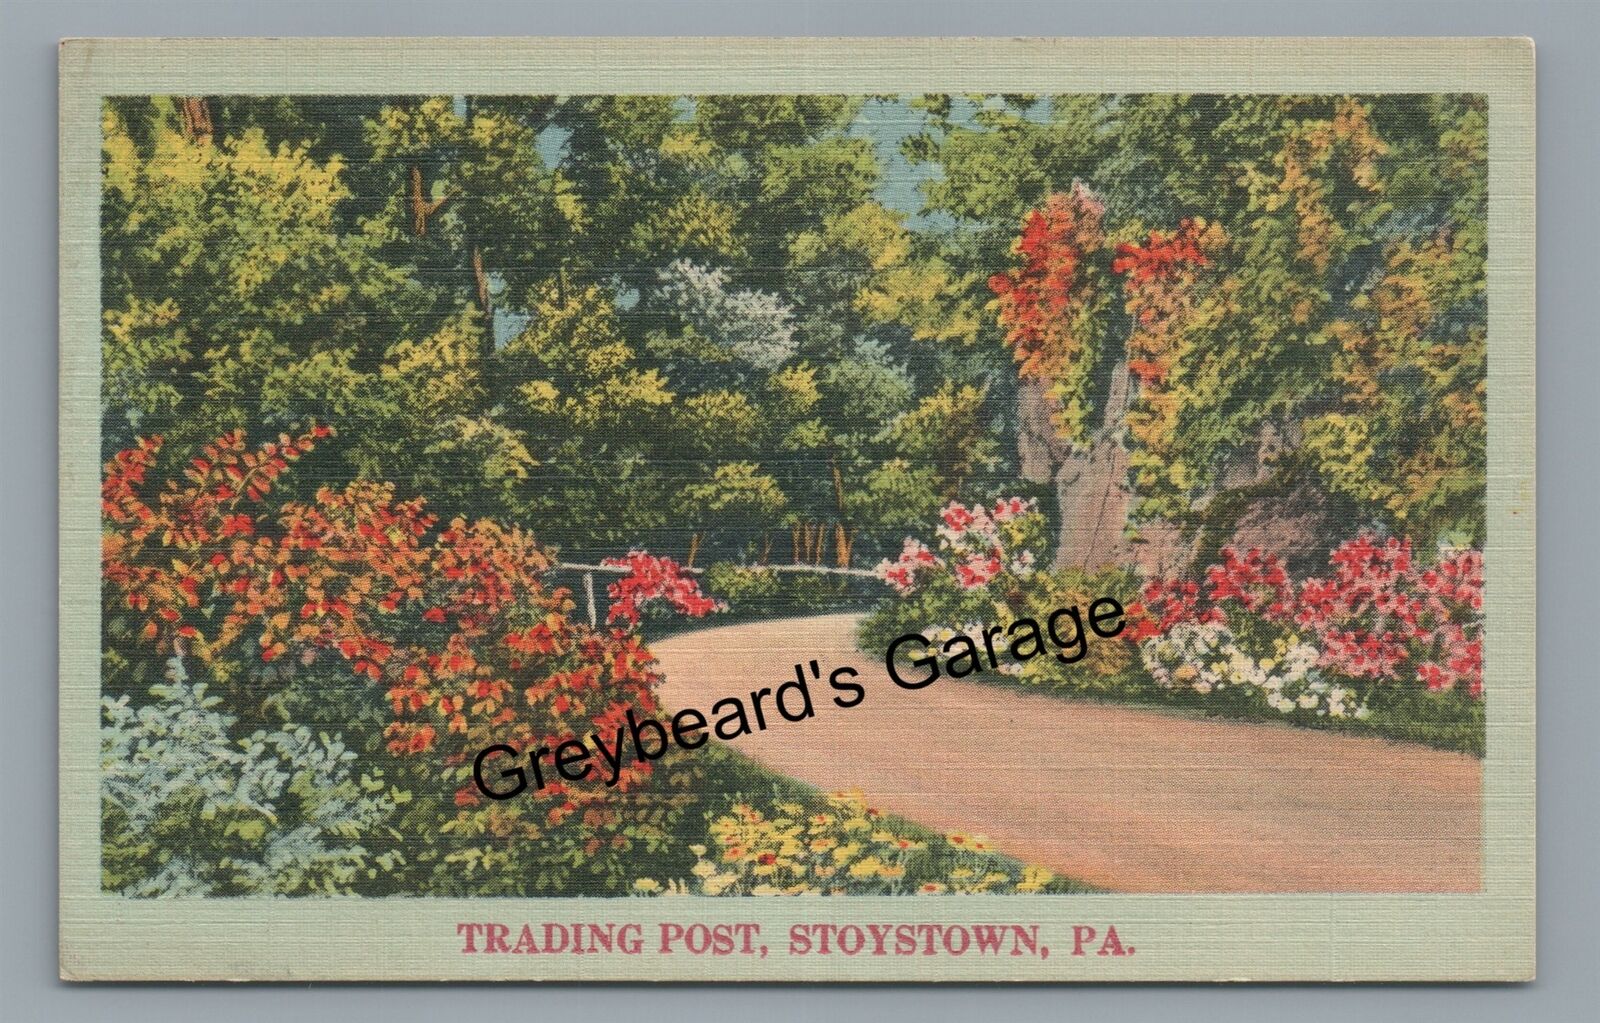 Trading Post Greeting from STOYSTOWN PA Somerset County Pennsylvania Postcard 2